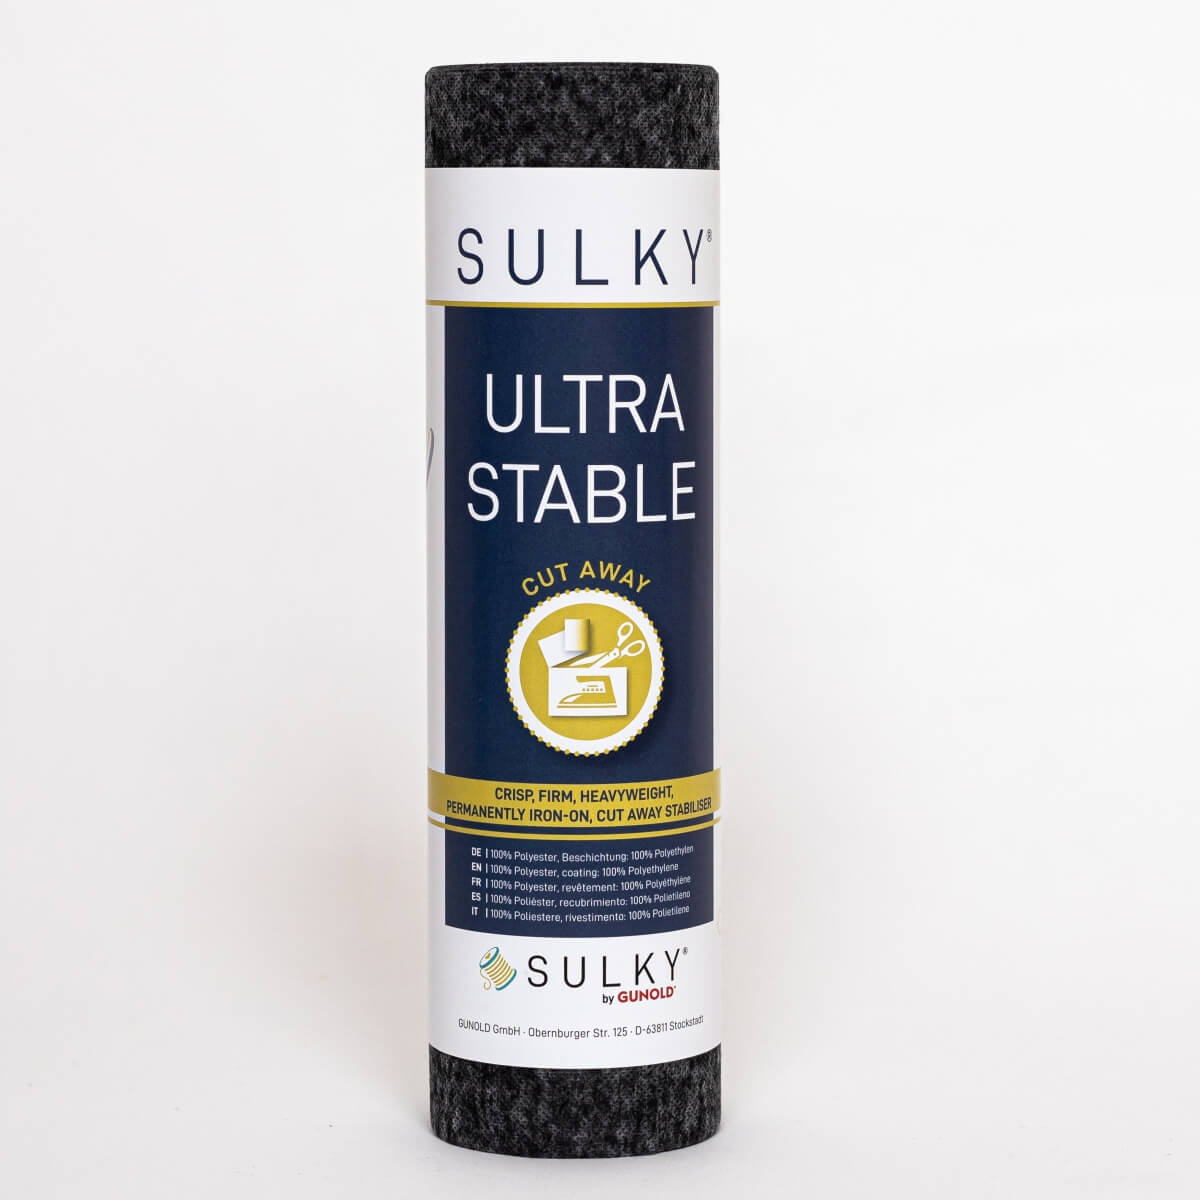 SULKY ULTRA STABLE black, 25cm x 5m